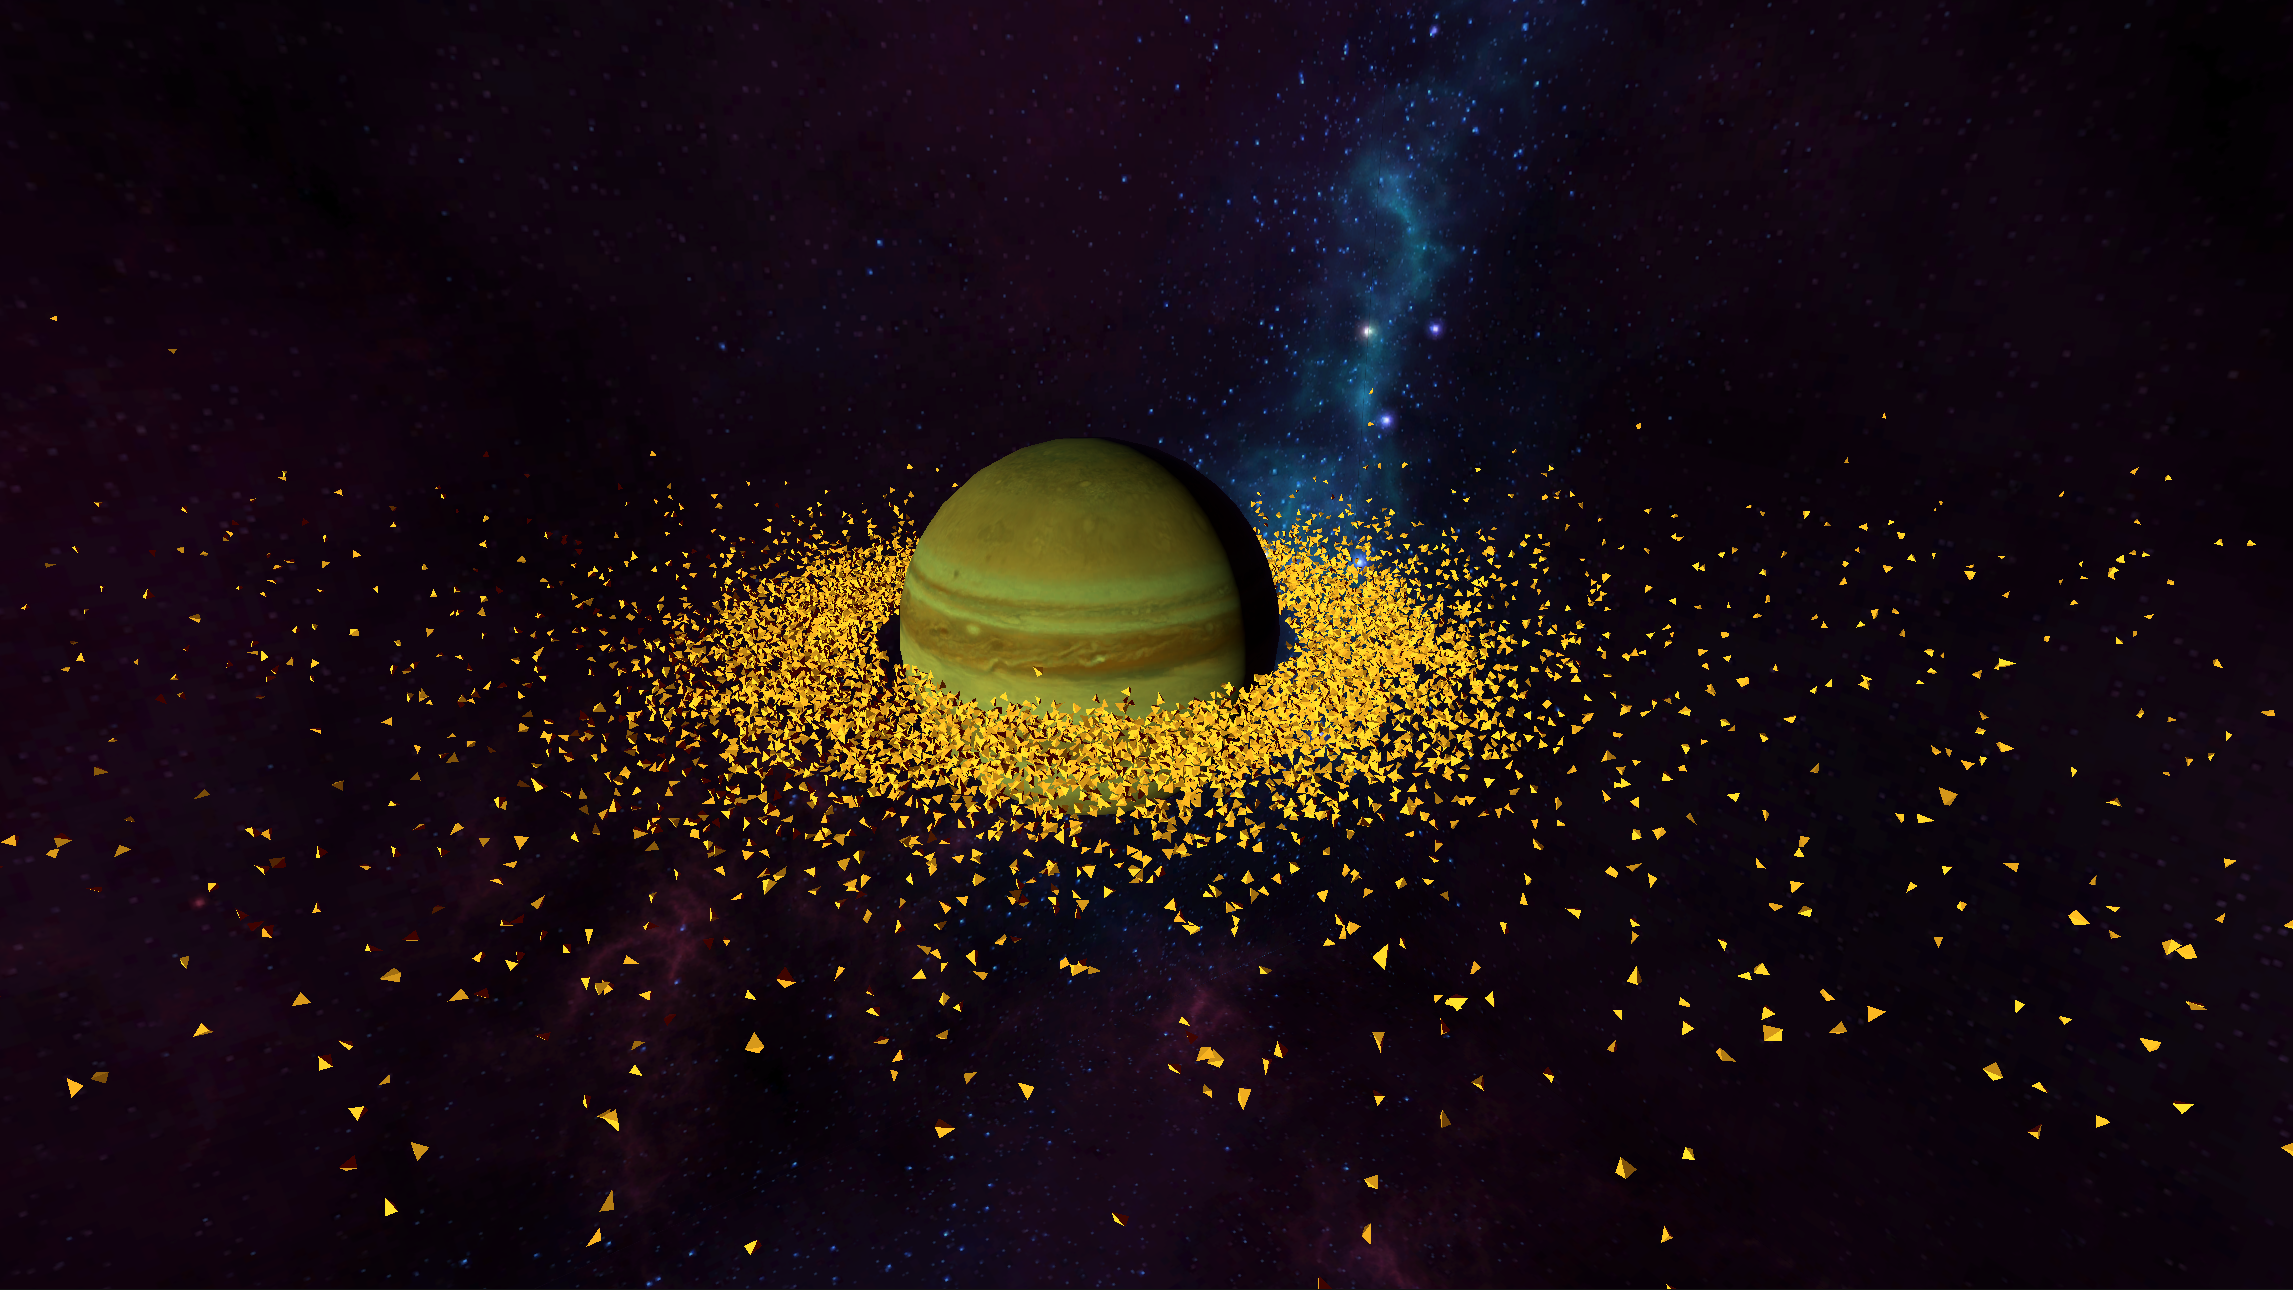 Performance demo of asteroids around a planet using Havok Physics for Unity